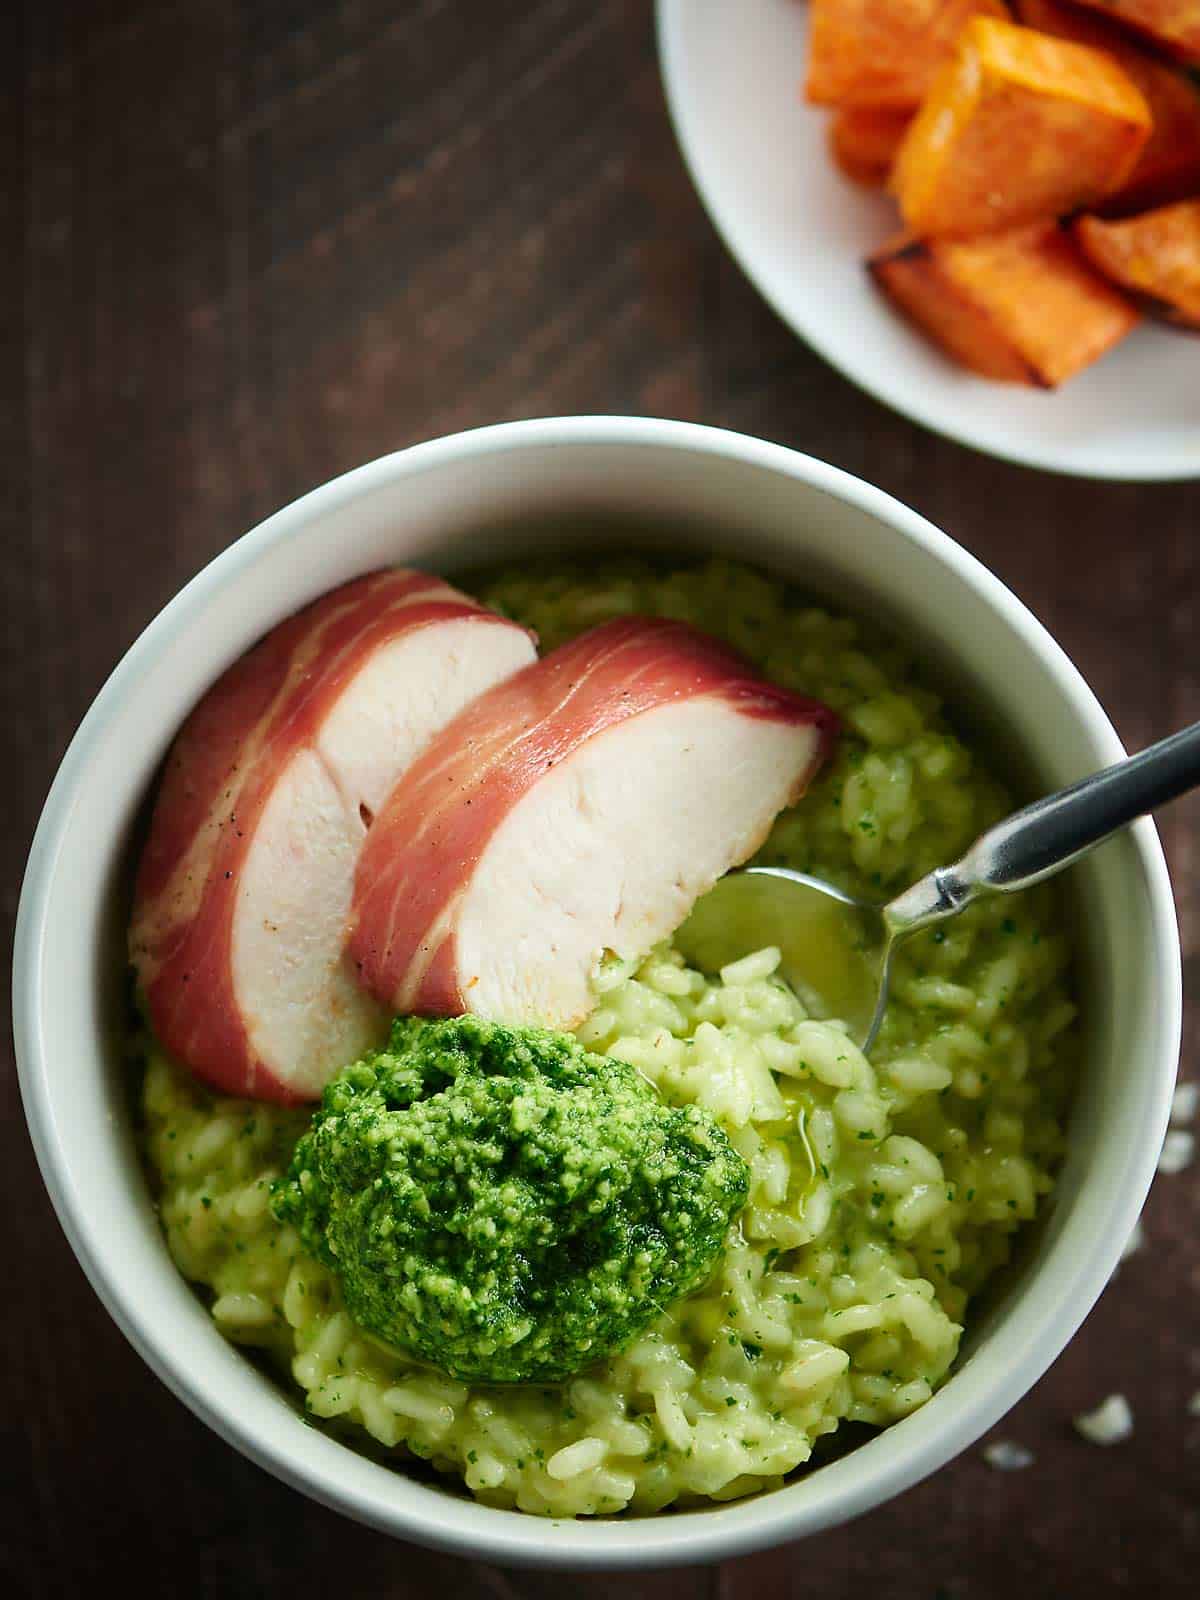 Pesto Risotto with Roasted Chicken and Vegetables